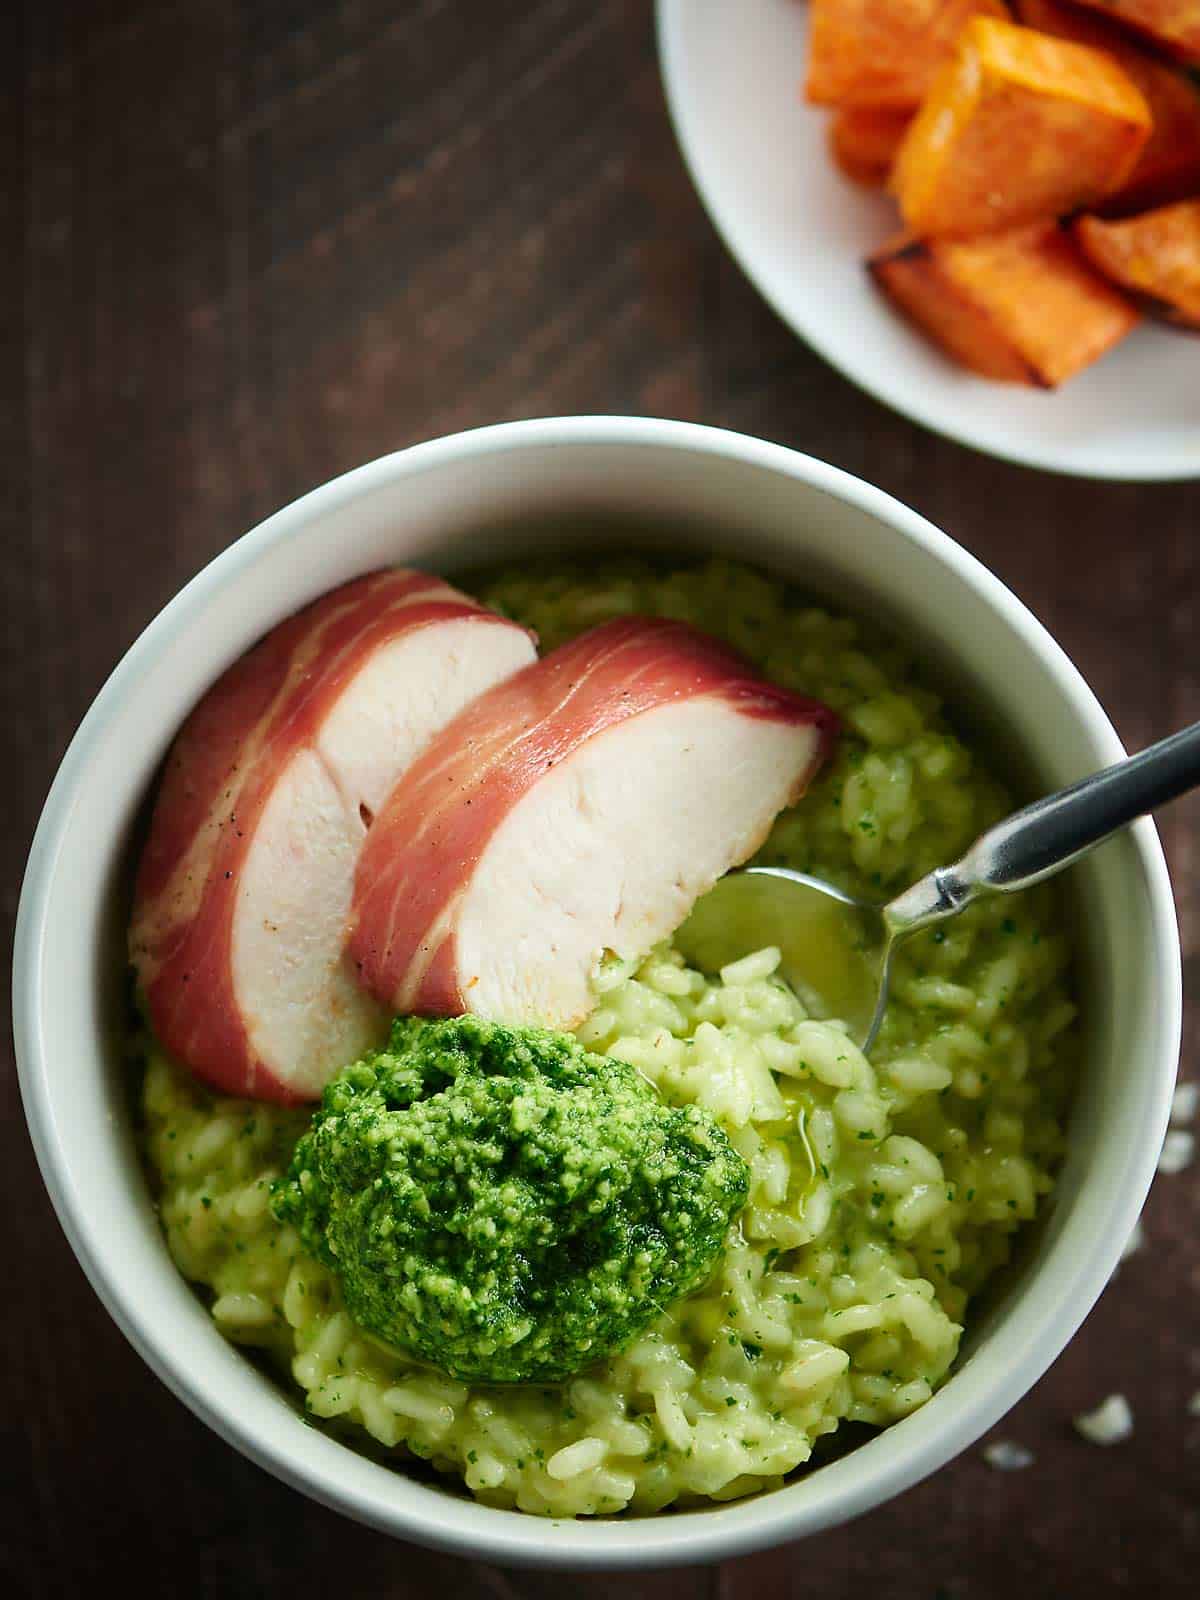 Pesto Risotto with Roasted Chicken and Vegetables